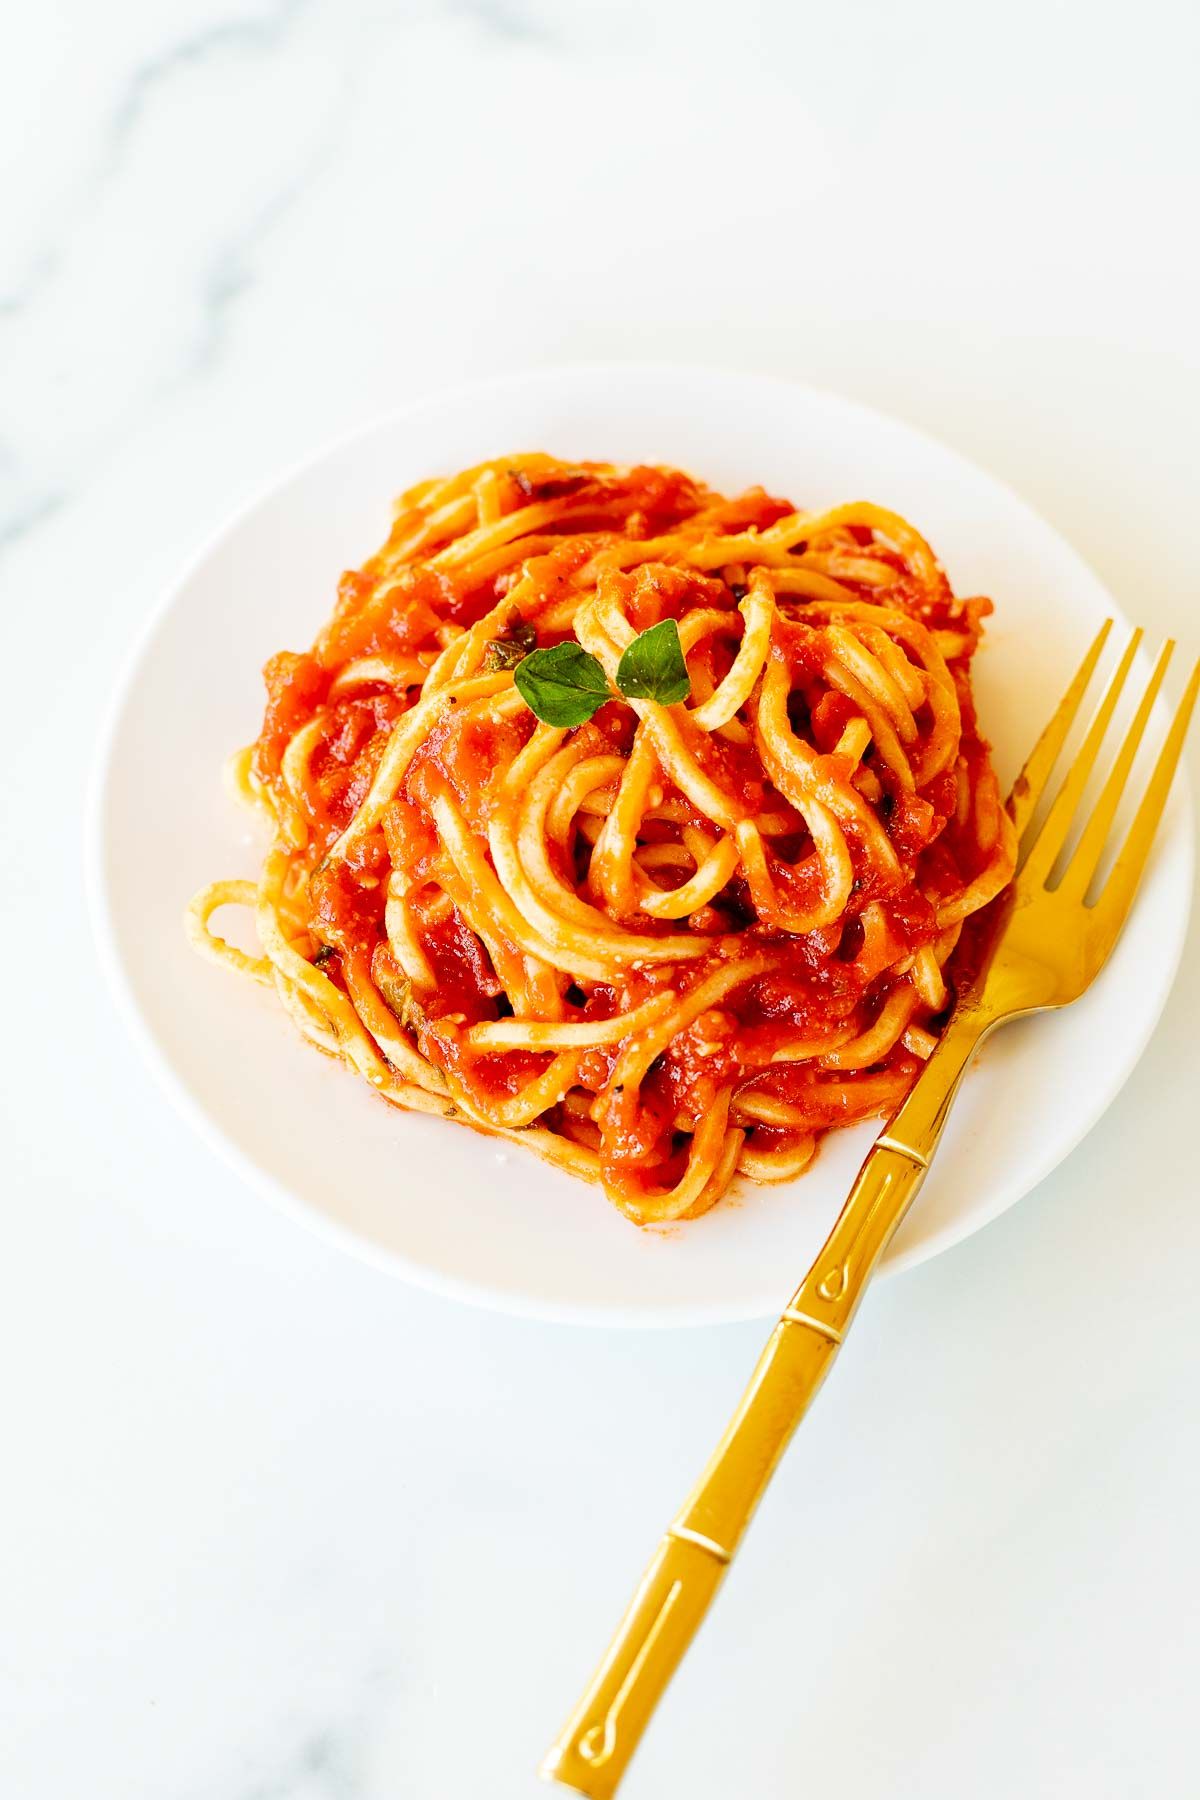 Spaghetti on a white plate, tossed in San Marzano tomato sauce, with a gold fork to the side.